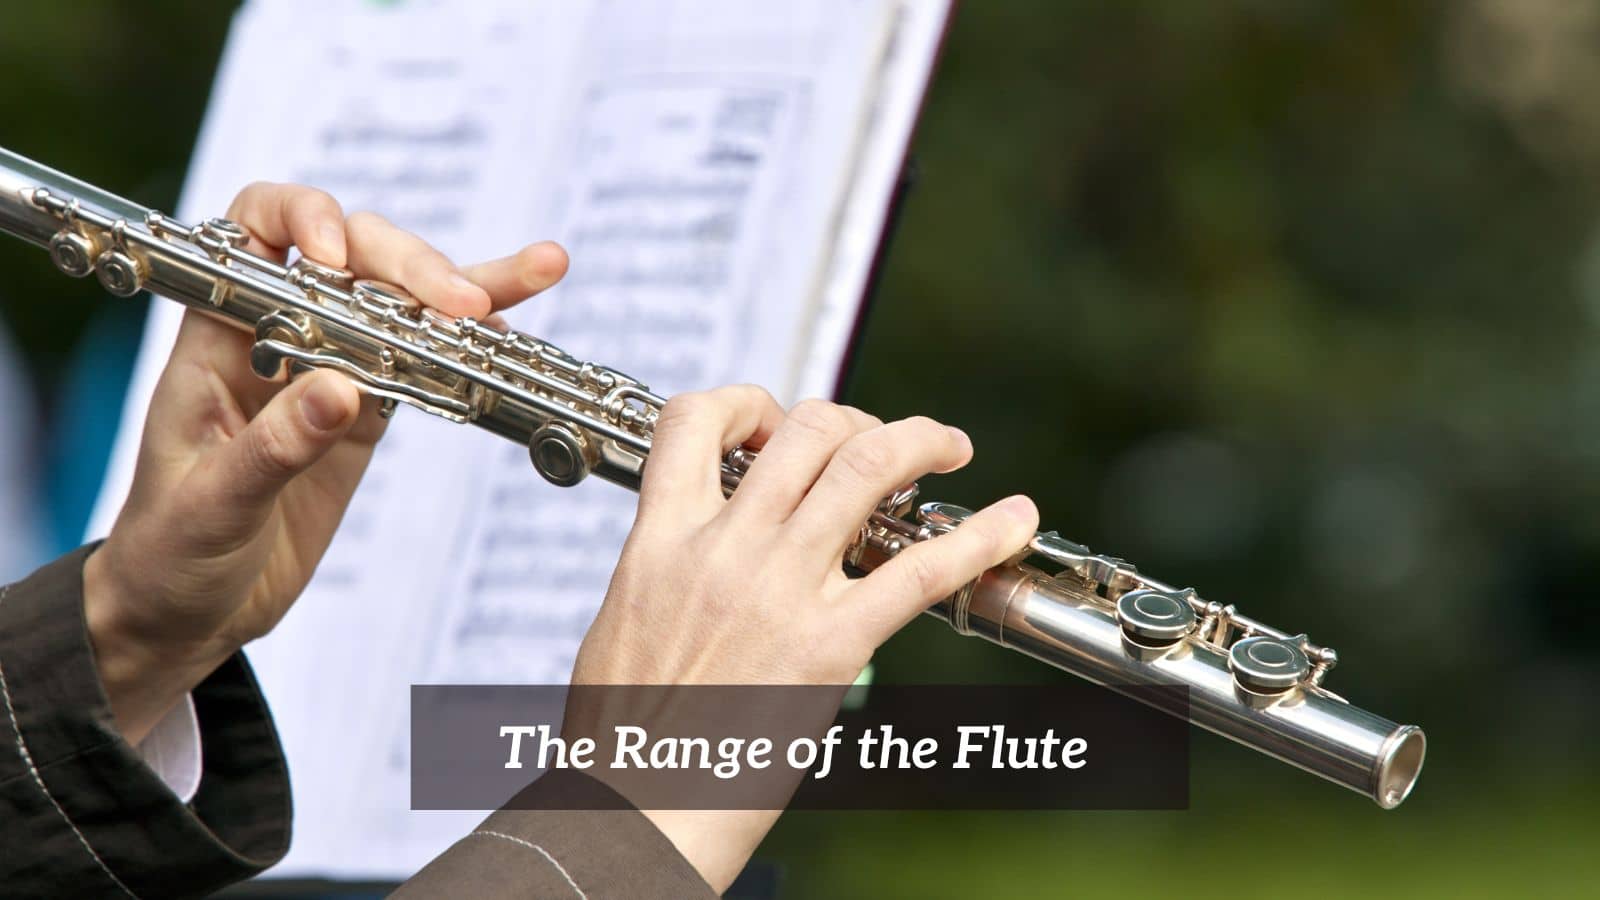 What Is The Range of the Flute